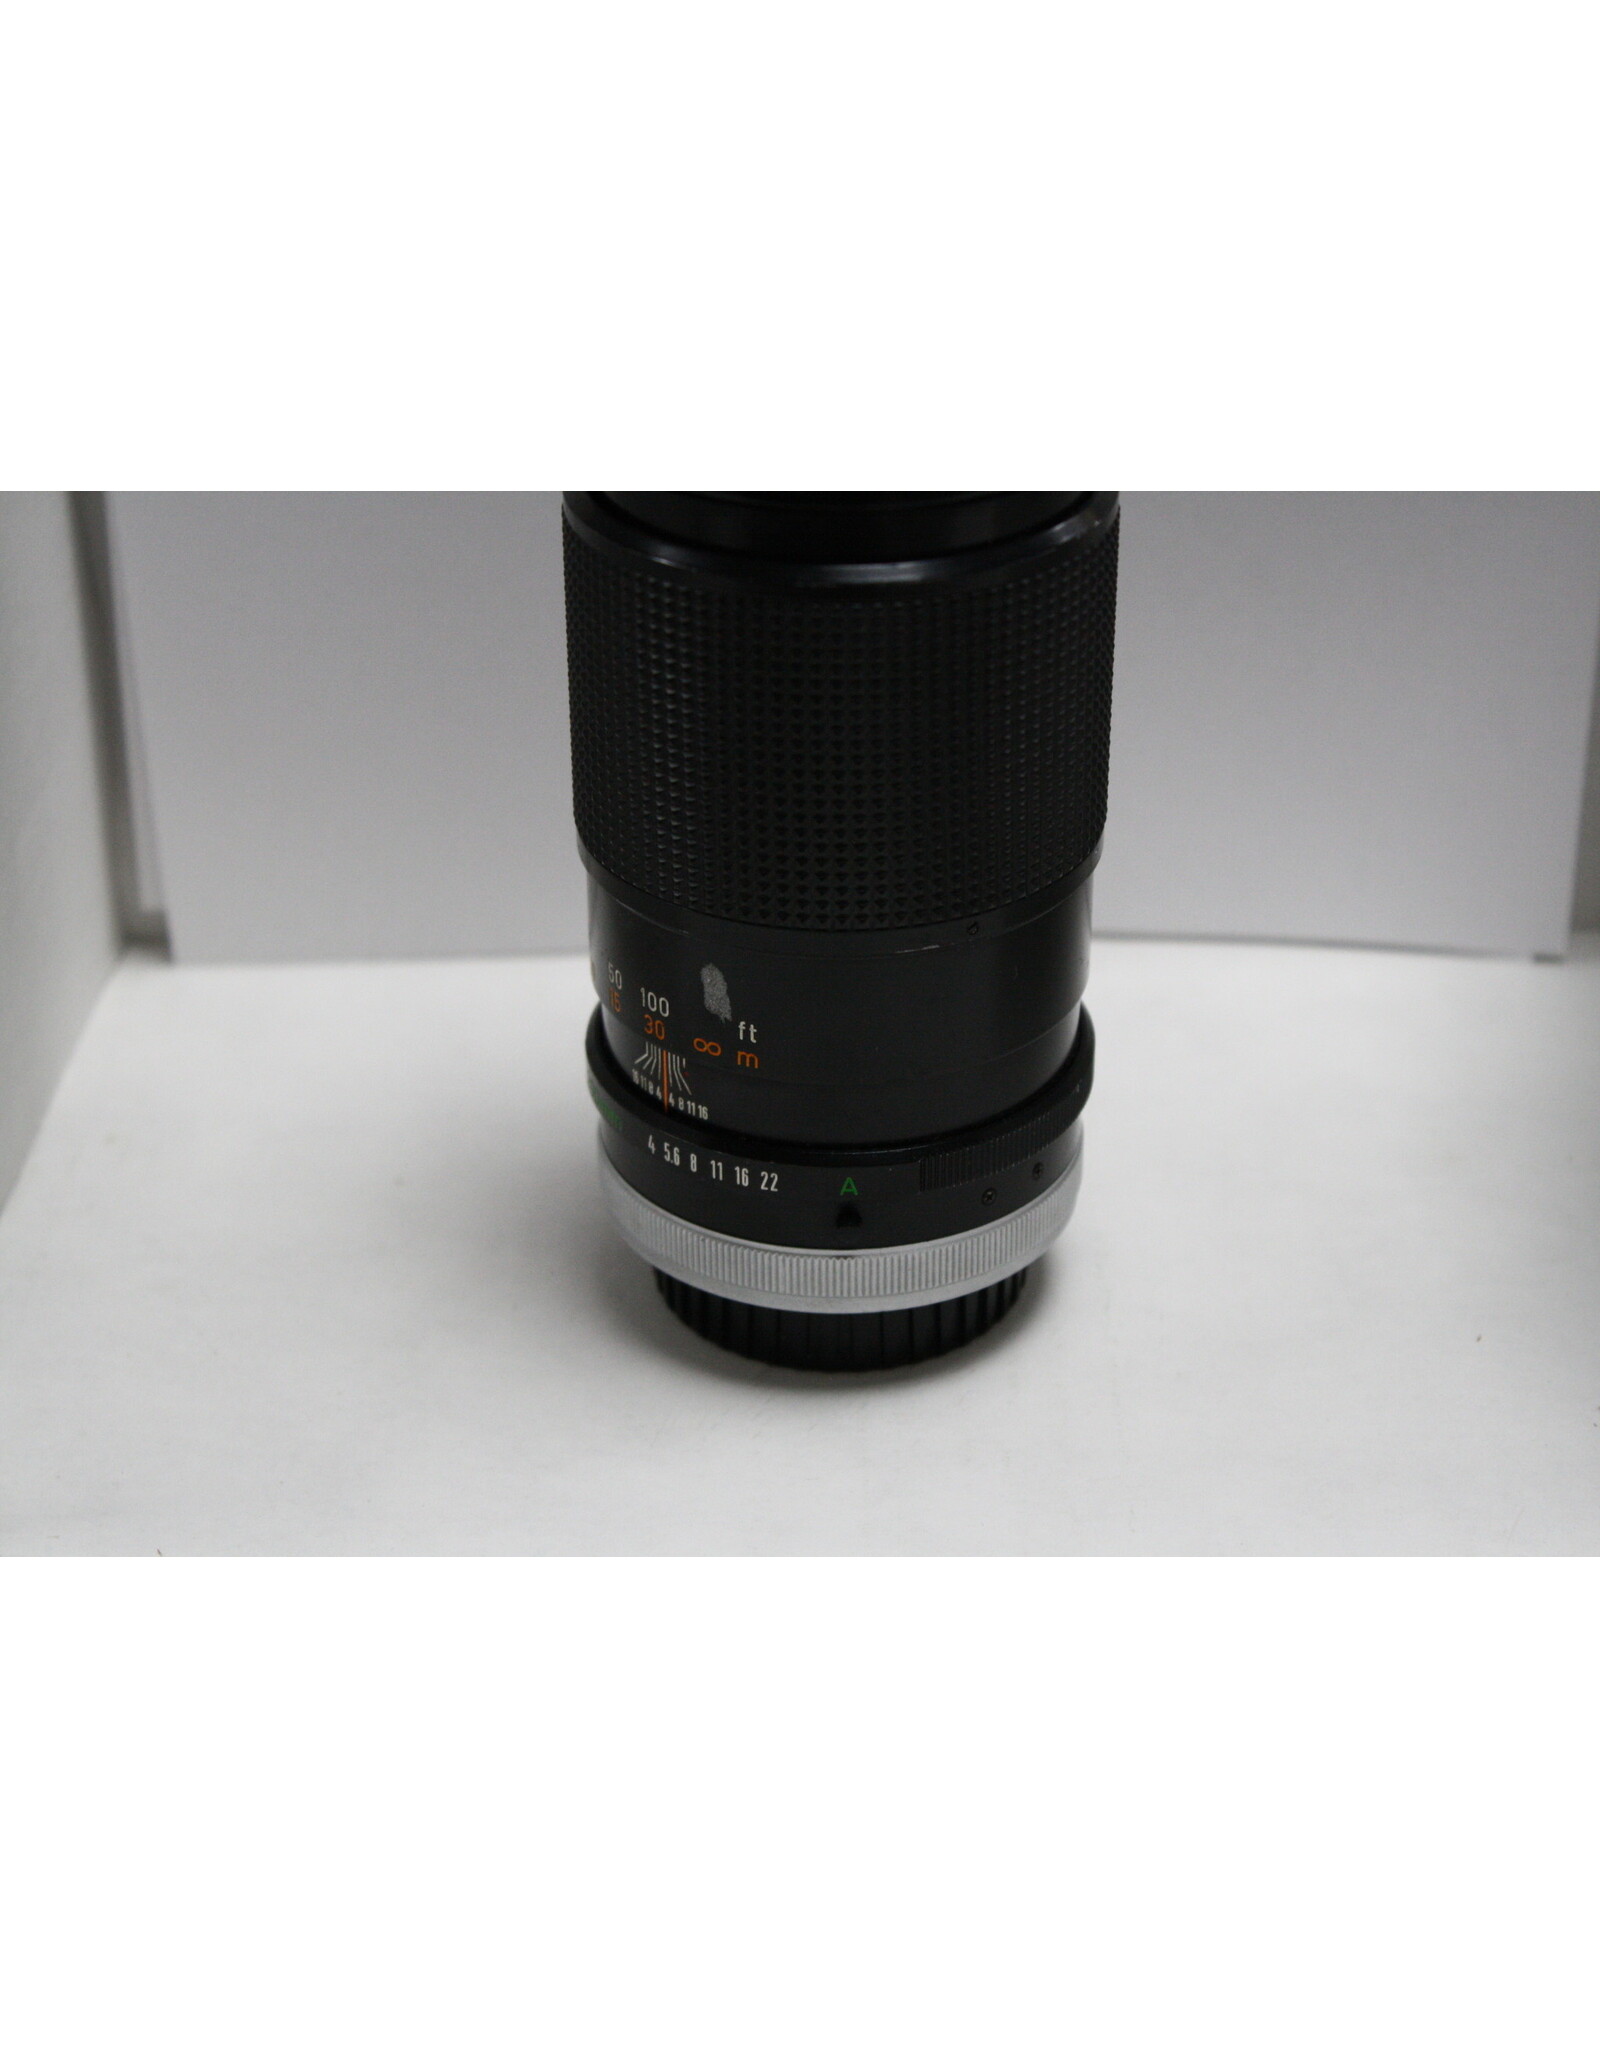 CANON LENS FD 200mm 1:4 s.s.c (Pre-owned)